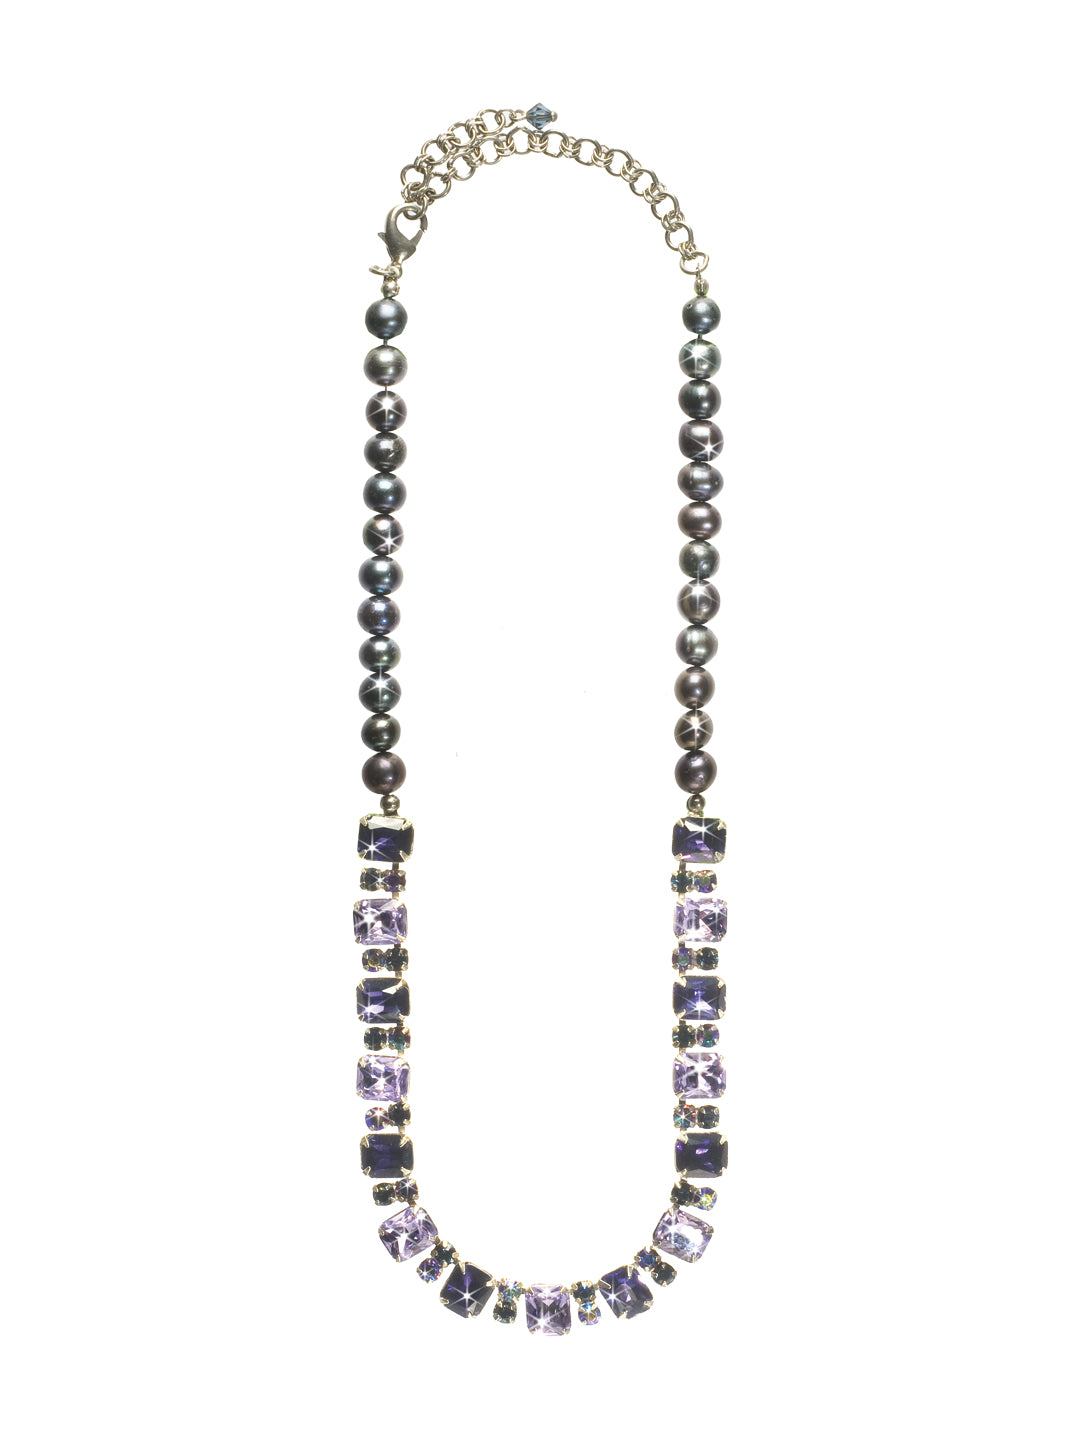 Sparkle Squared Necklace - NCM10ASHY - <p>Get your daily fill of elegance and shine. Square- and circle-cut gems combined with classic pearls make this necklace the perfect recipe for fabulous! From Sorrelli's Hydrangea collection in our Antique Silver-tone finish.</p>